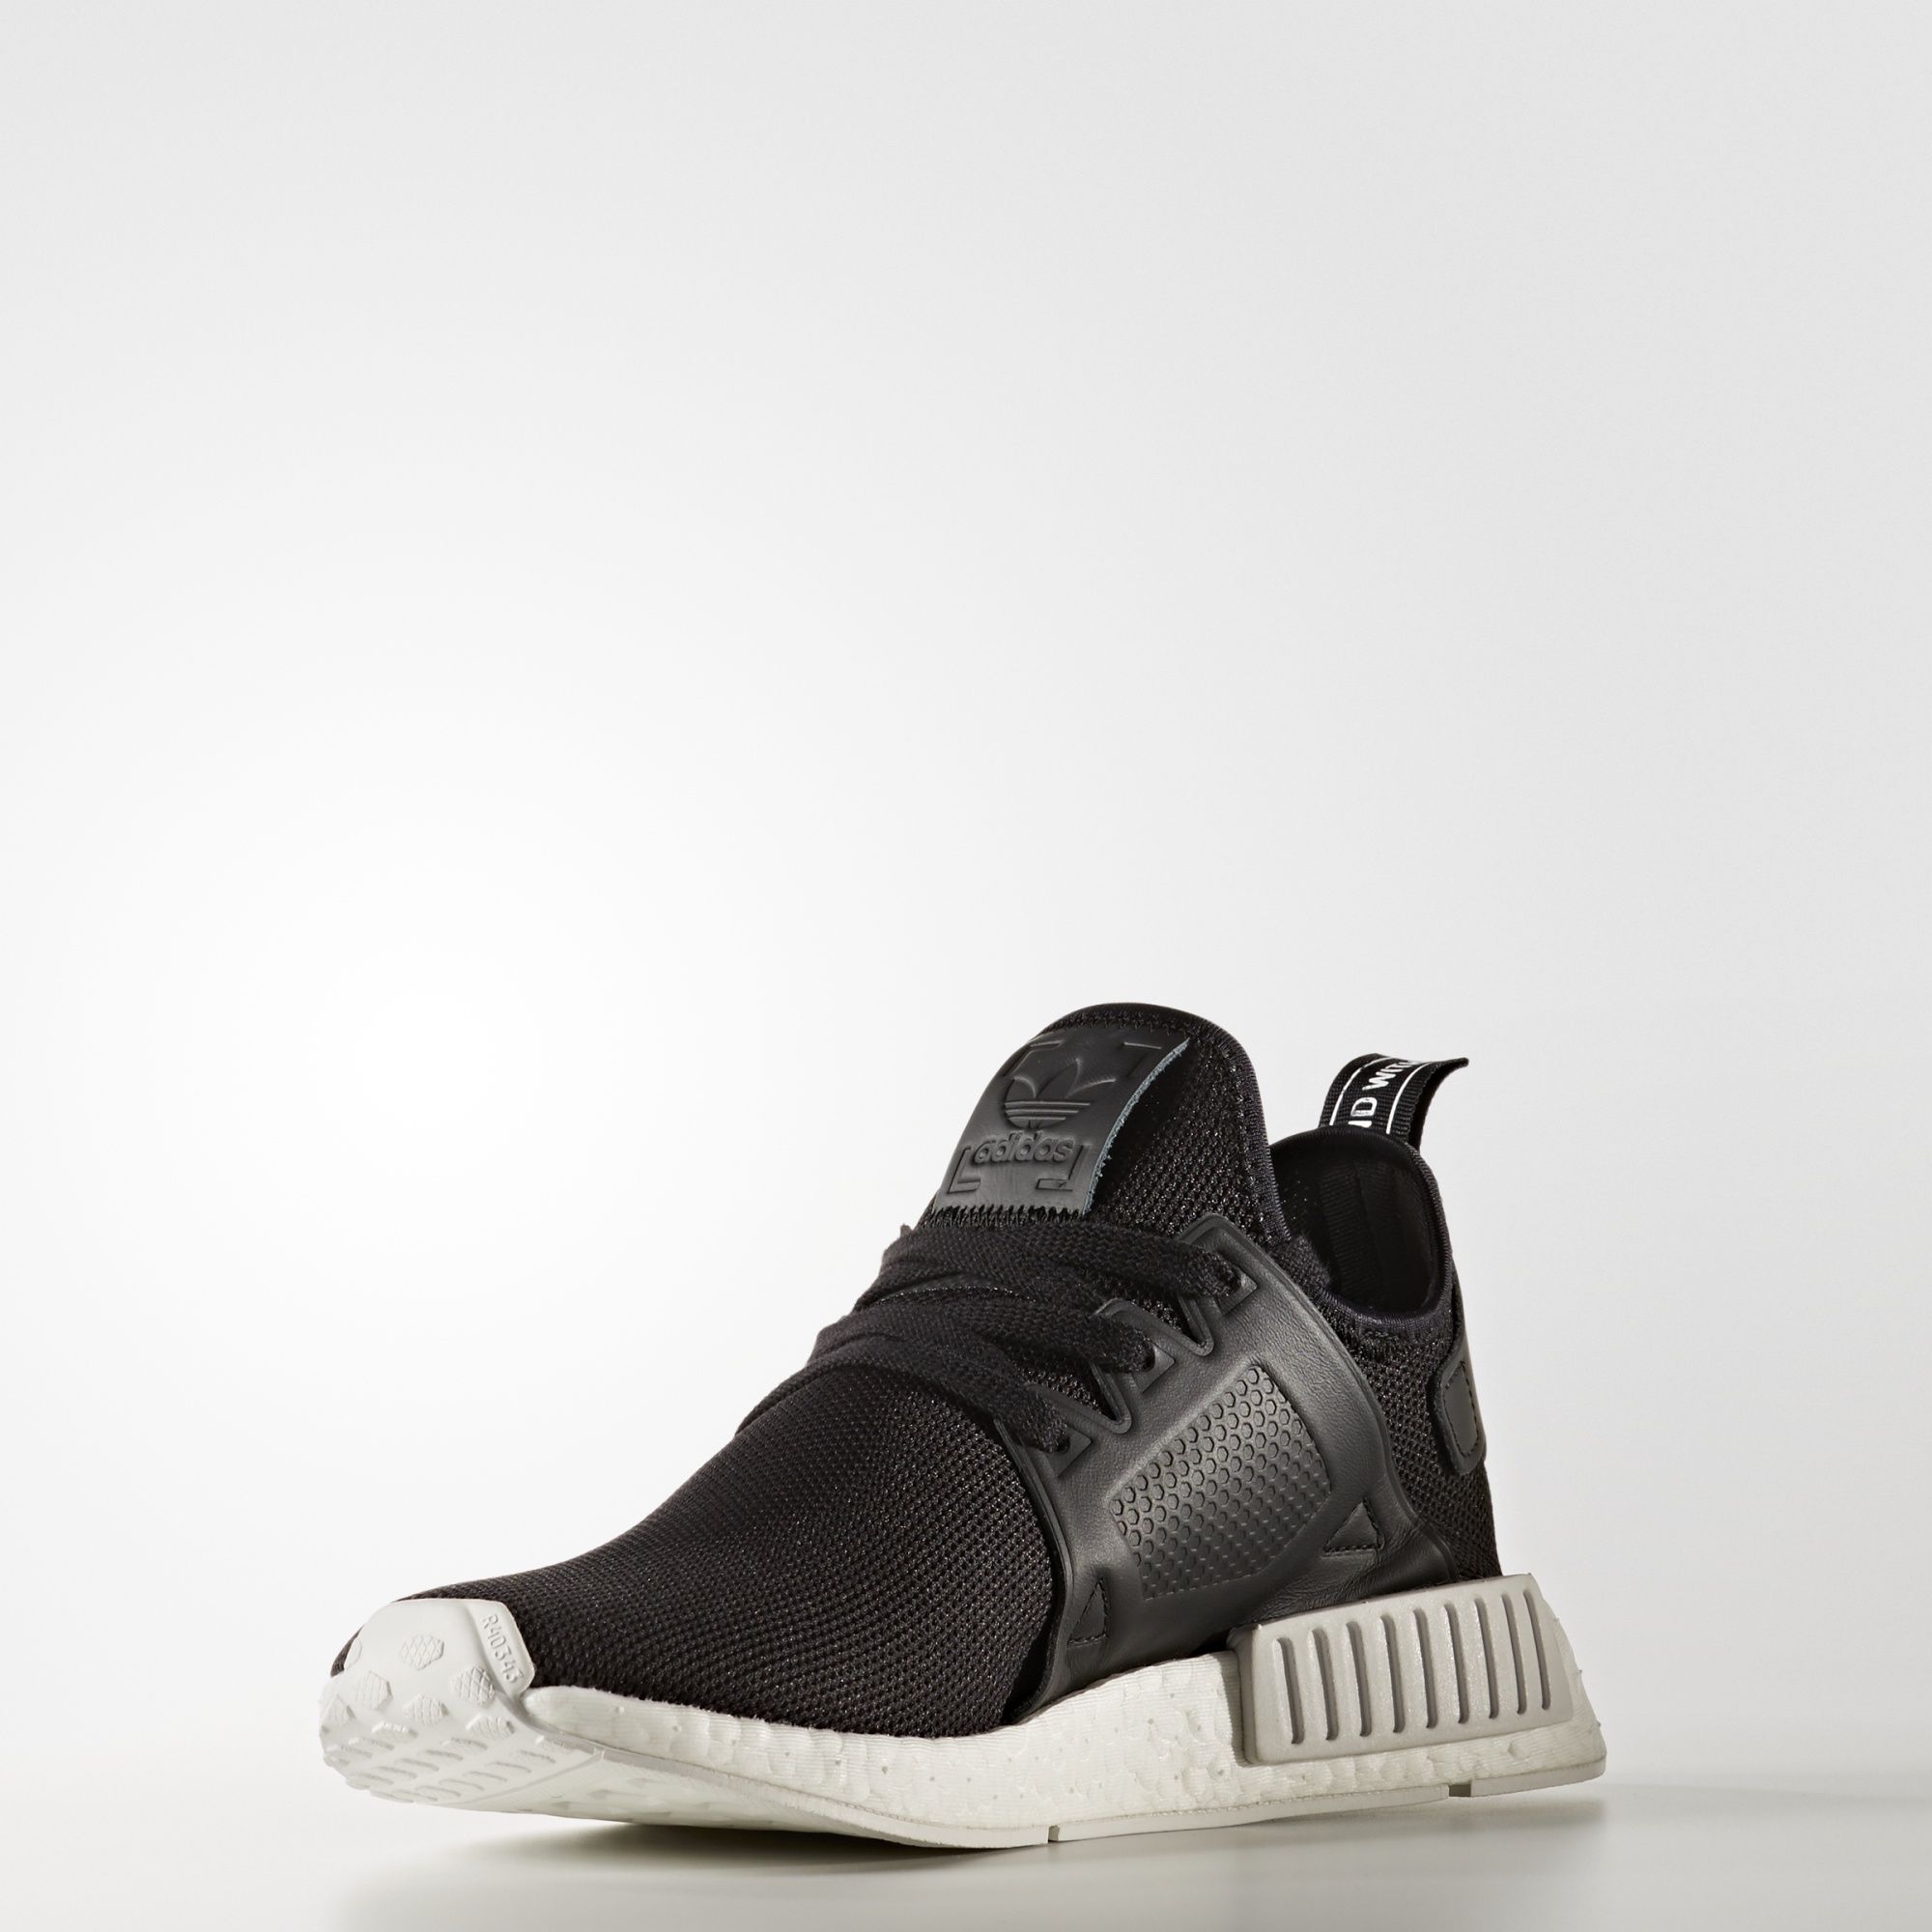 adidas-nmd_xr1-core-black-leather-cage-3